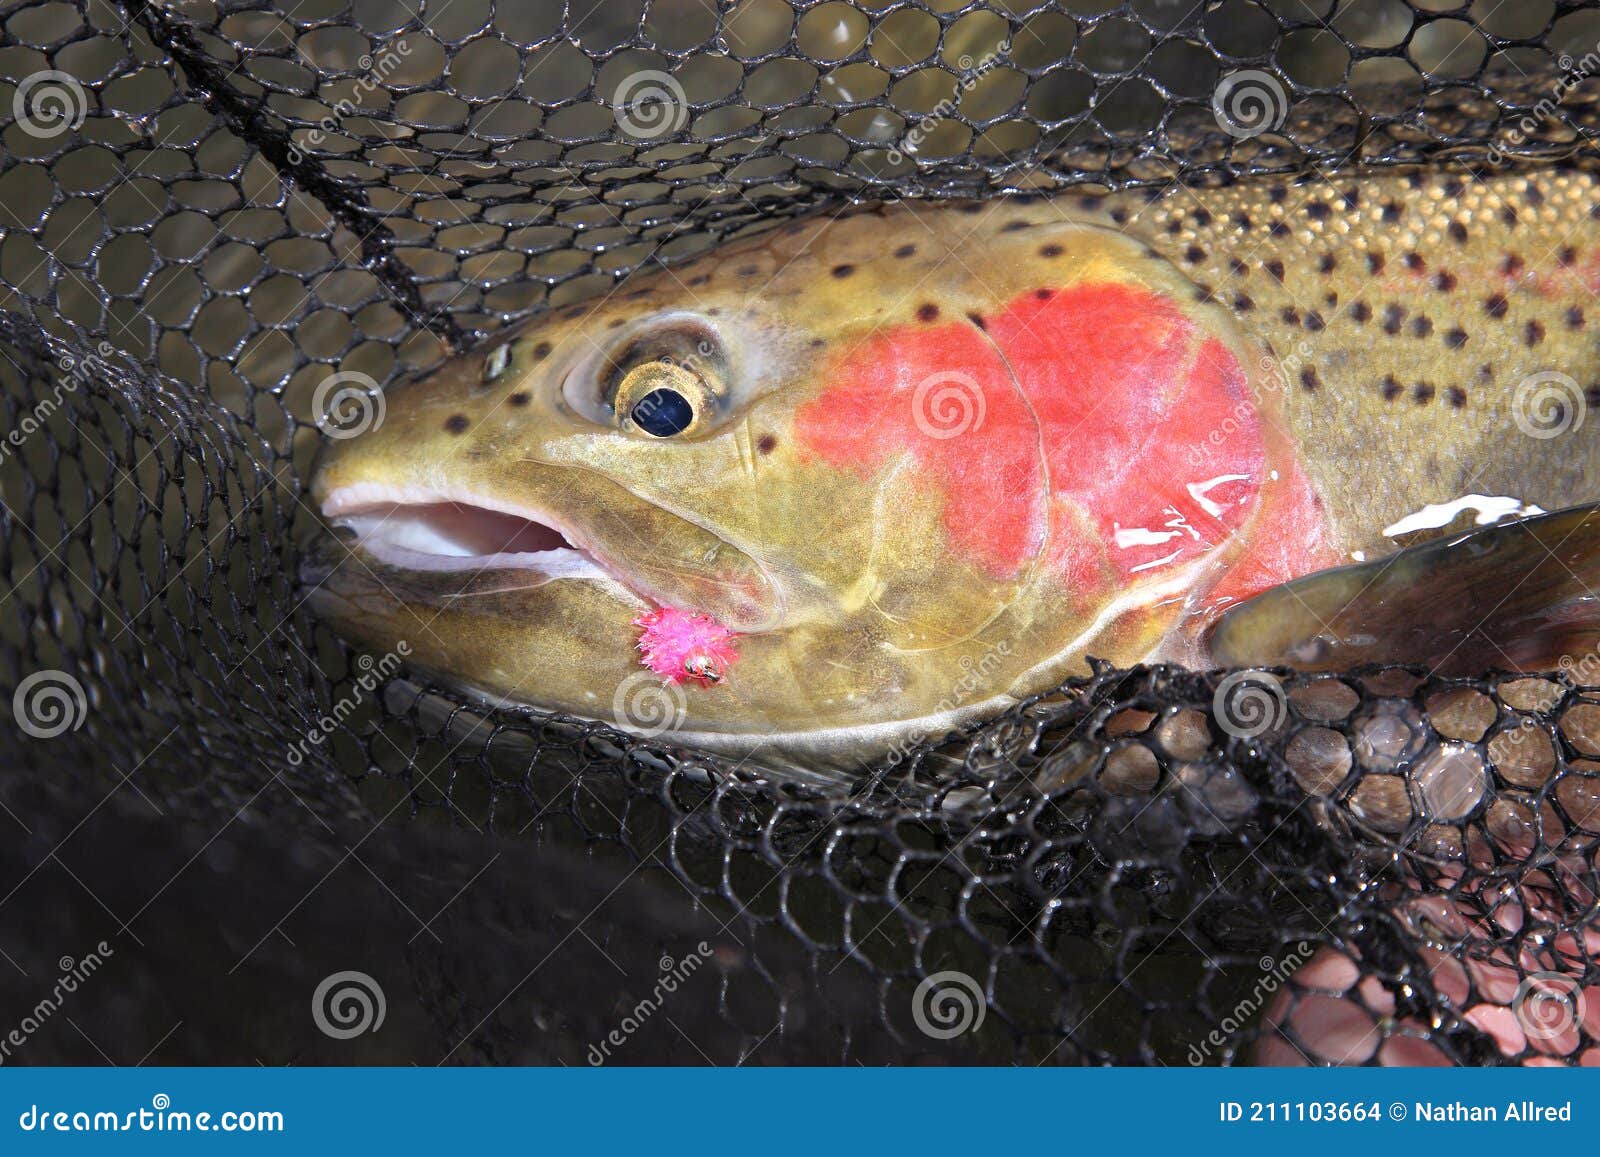 https://thumbs.dreamstime.com/z/freshly-caught-steelhead-trout-net-pink-fly-lure-mouth-closeup-steelhead-trout-net-fly-mouth-211103664.jpg